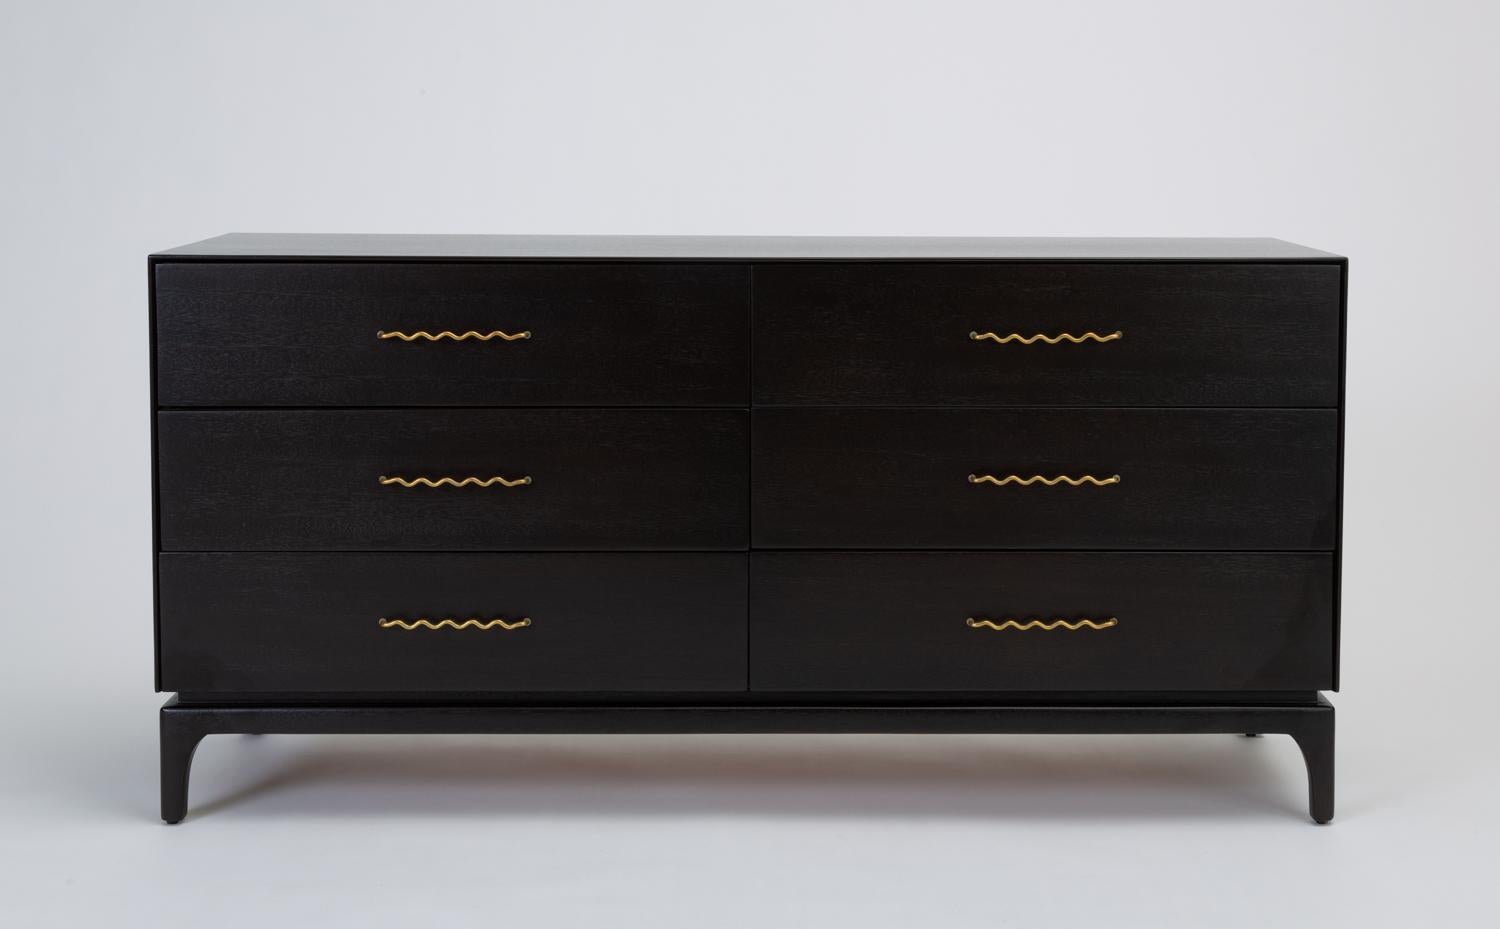 A modest dresser in ebonized mahogany designed by John Keal and produced by Brown Saltman has six drawers in a slender case, perched on a frame with four petite, sculpted legs. The piece's most distinctive attributes are its whimsically curled